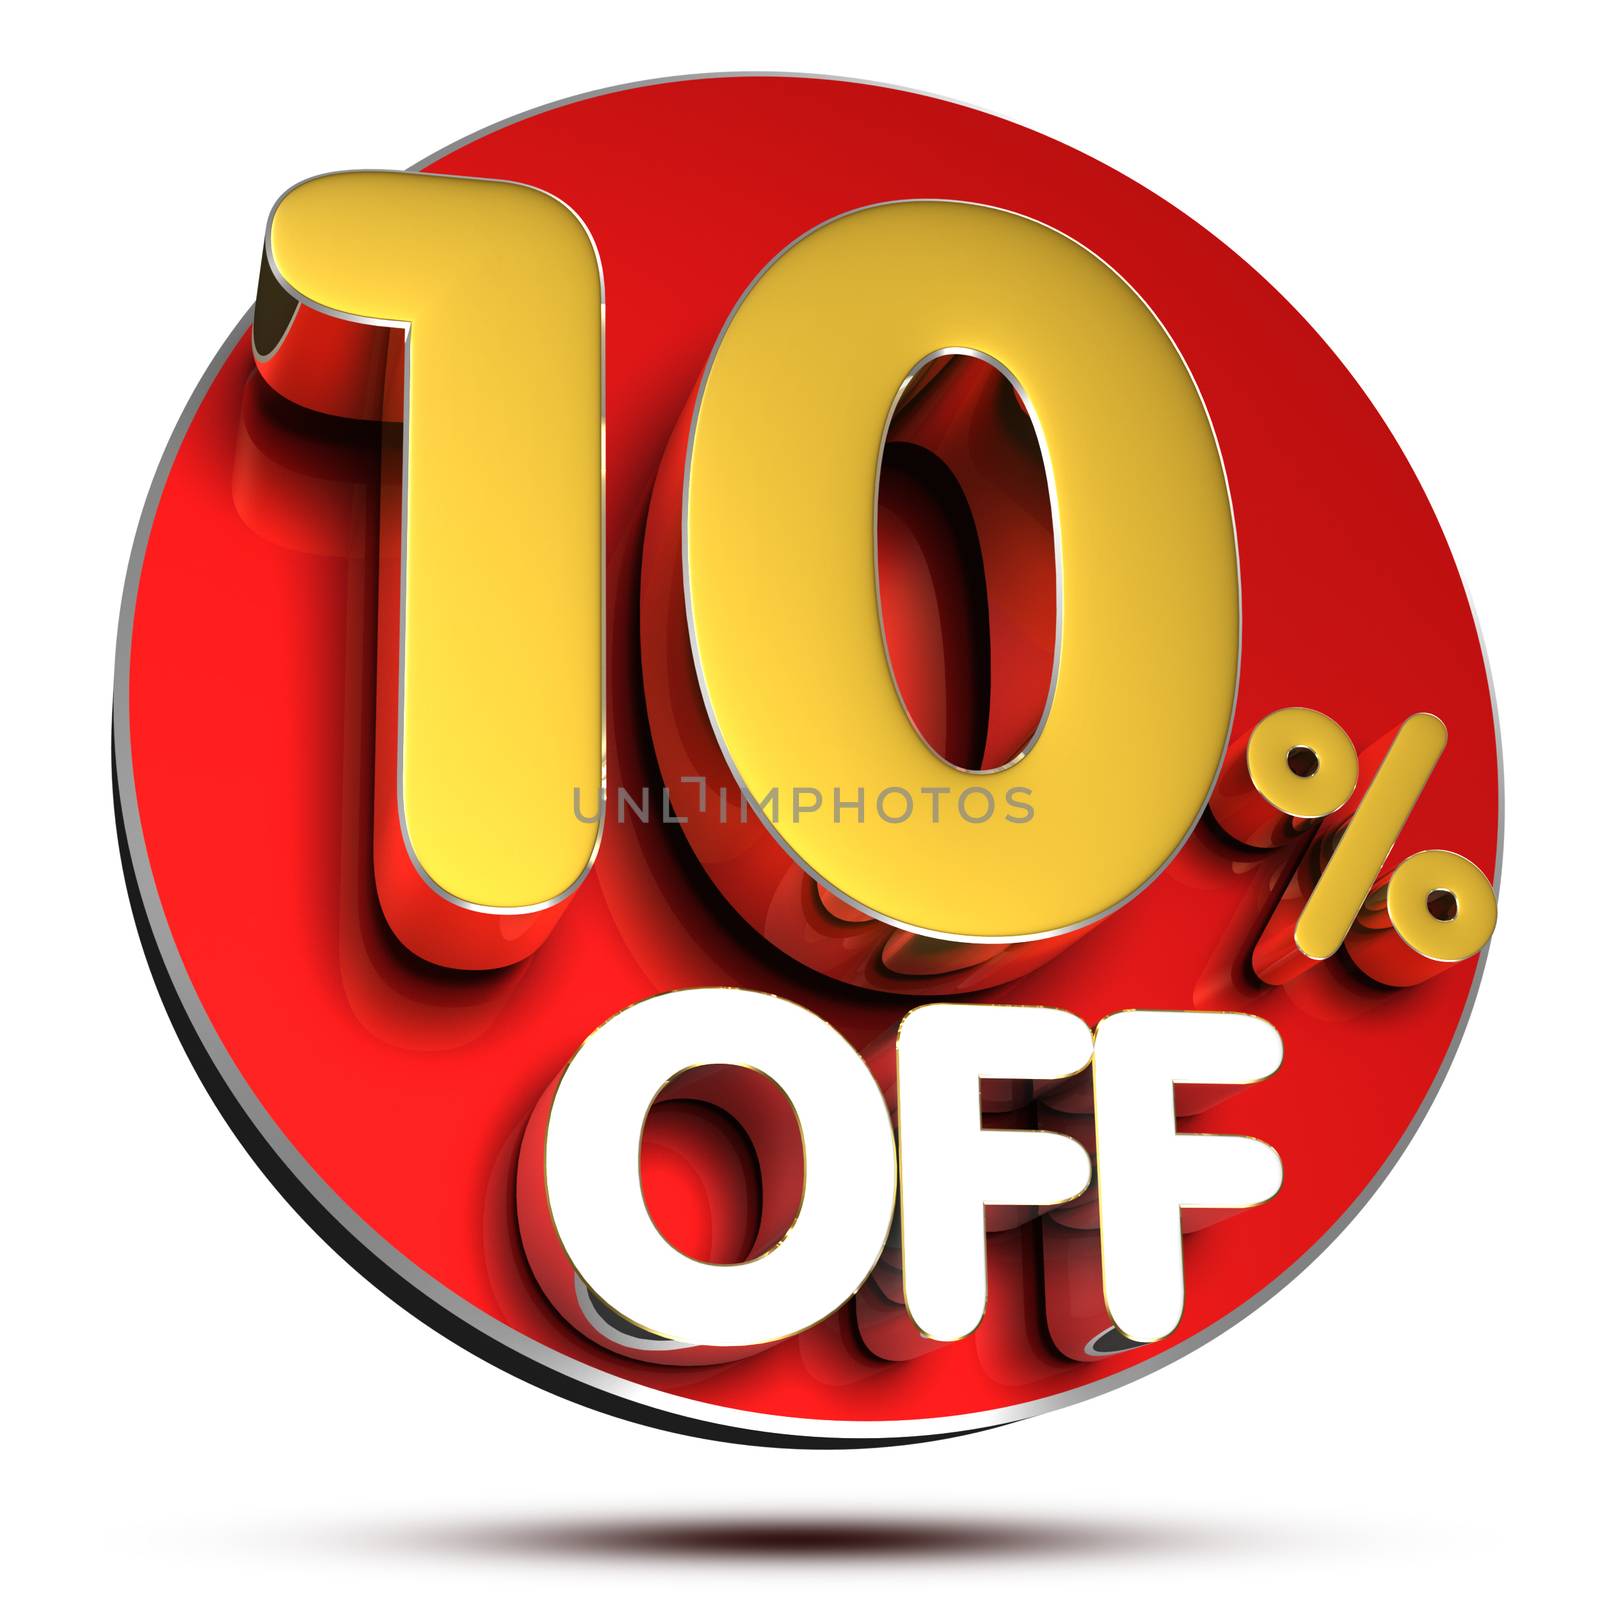 10 Percant off 3D rendering on white background.(with Clipping Path).